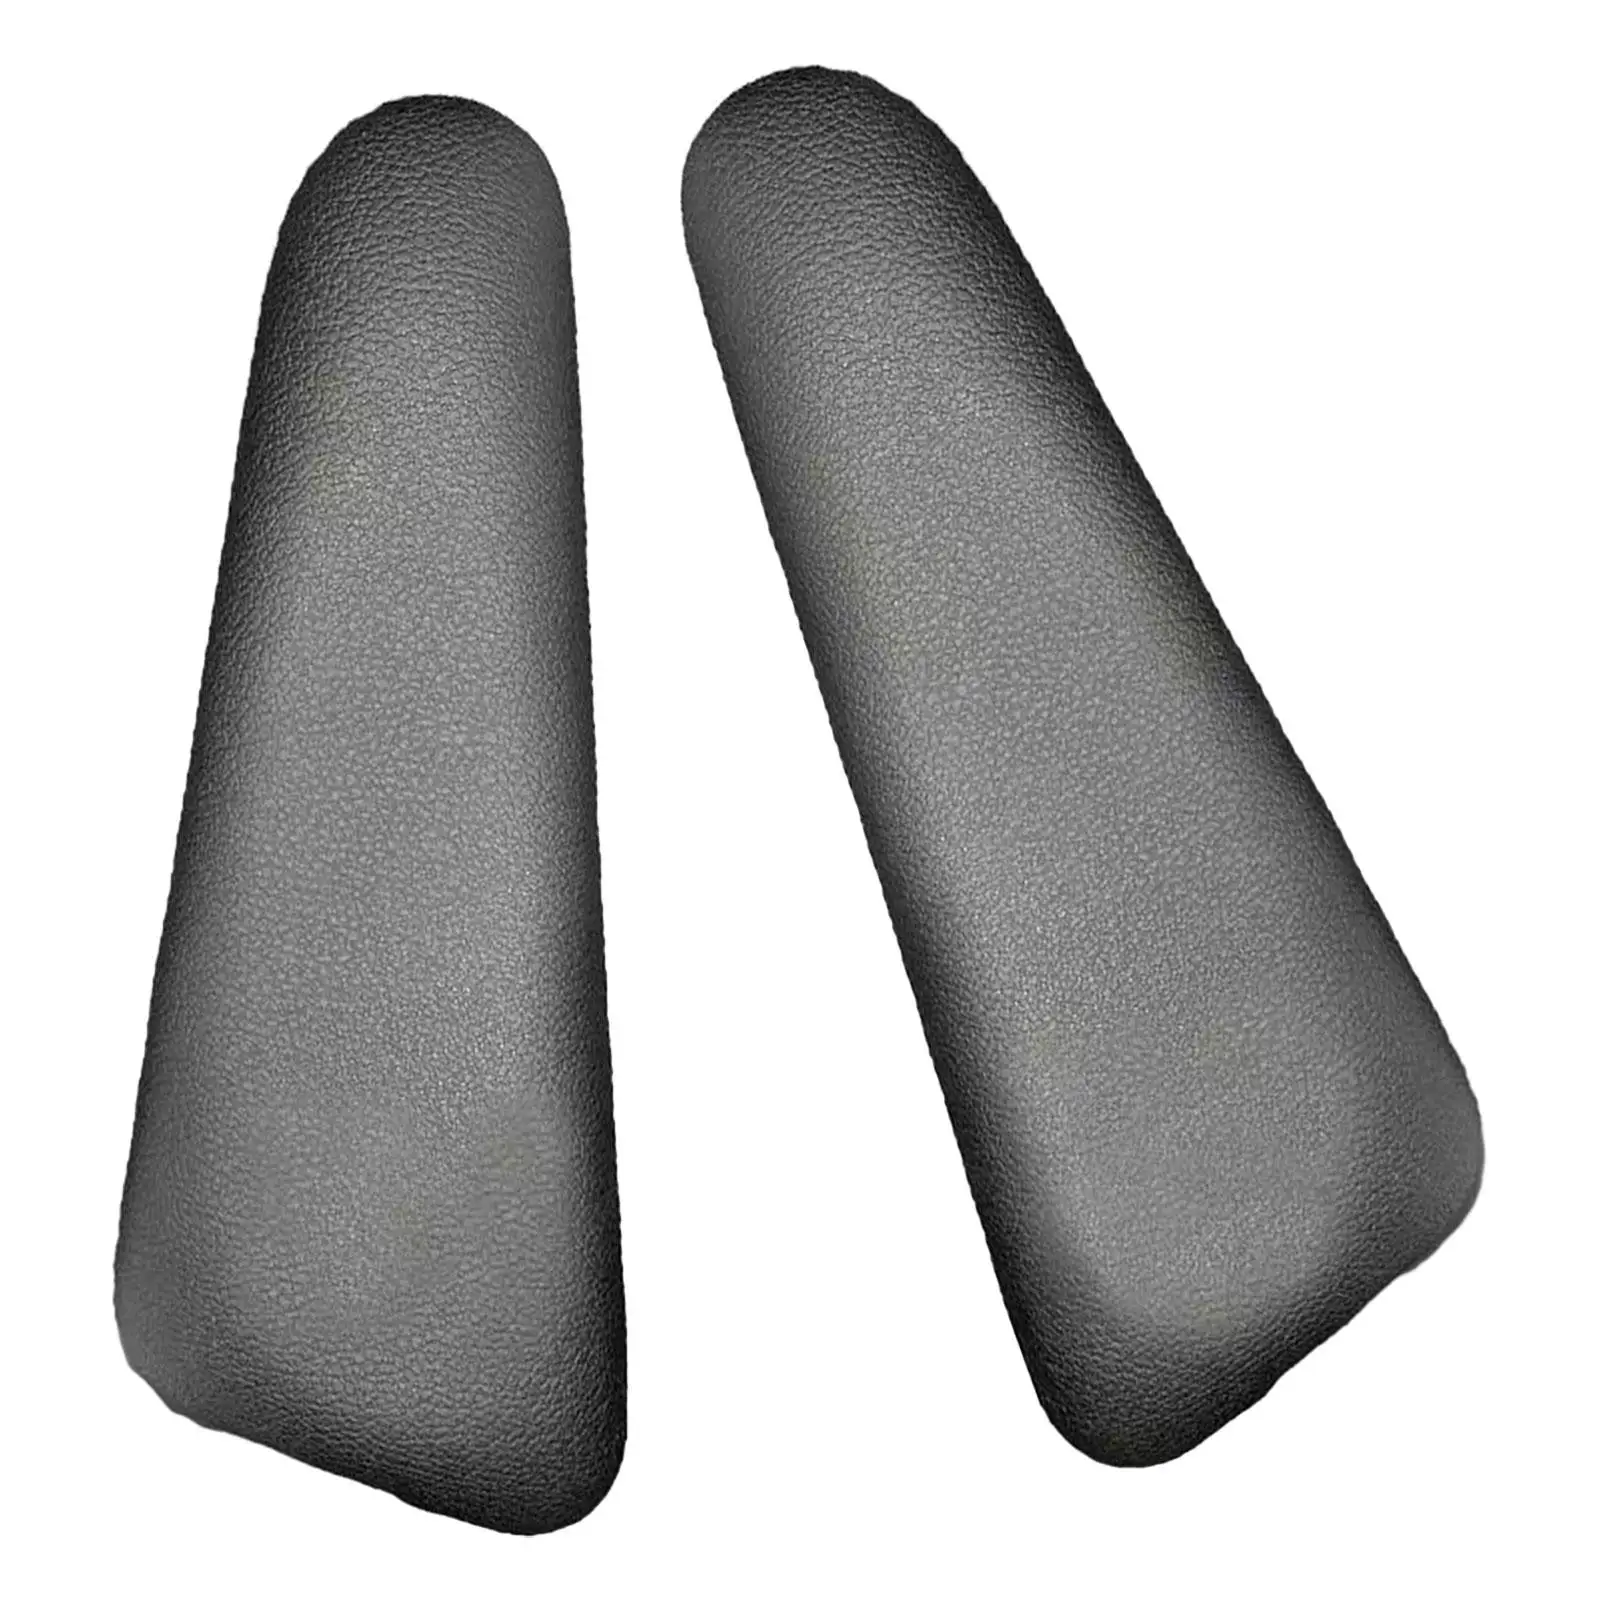 2x Car Knee Pad Cushions Accessories Protective Pad for Tesla Model 3 Y